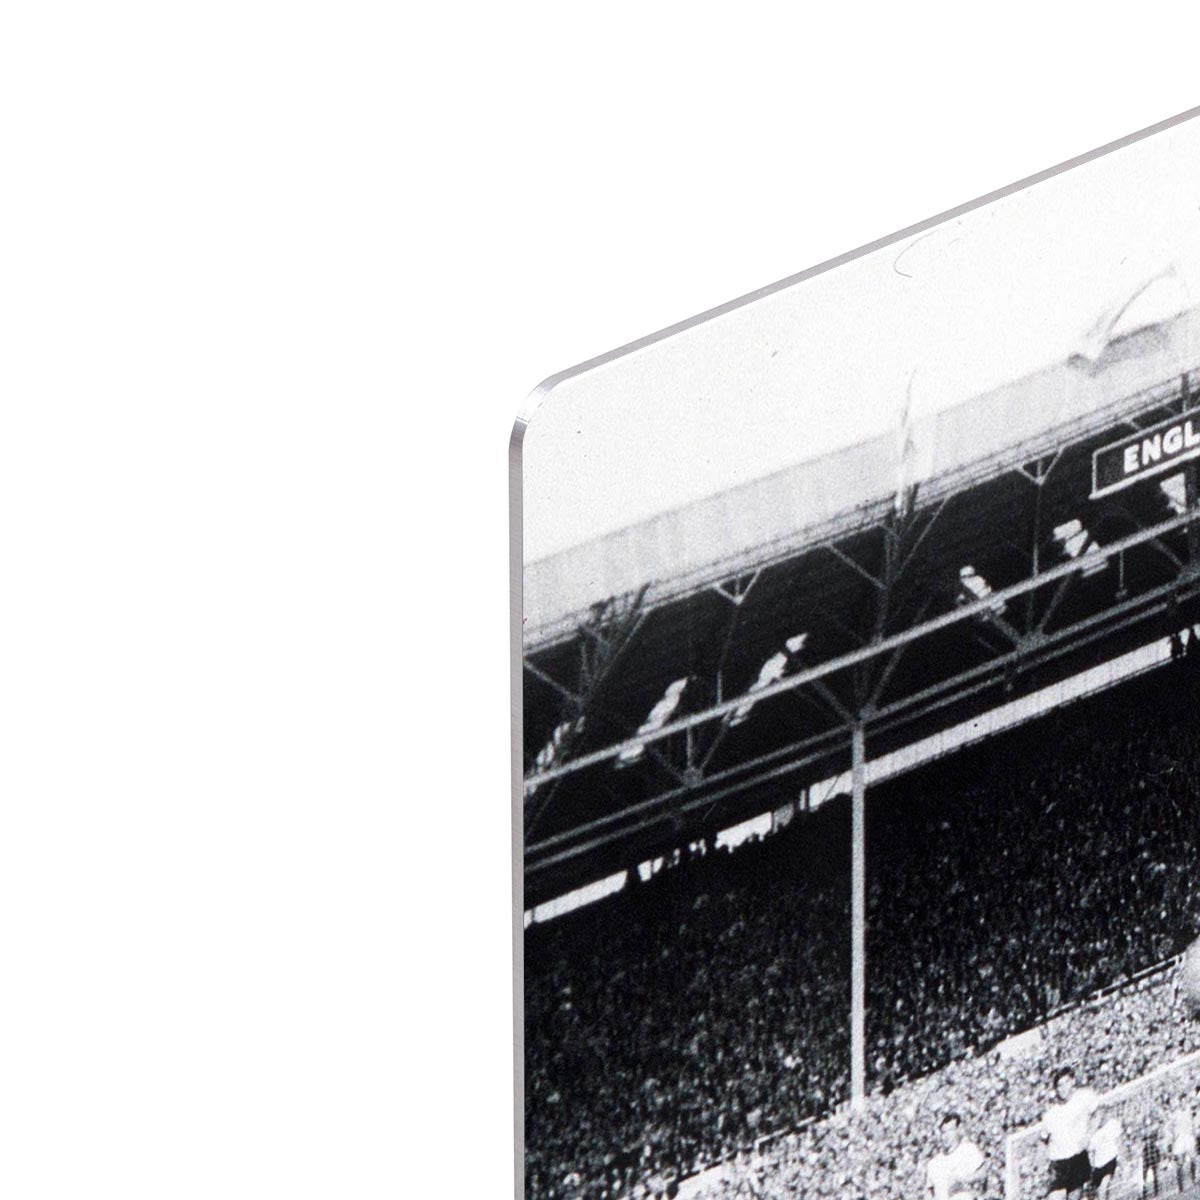 They think its all over Geoff Hurst Goal HD Metal Print